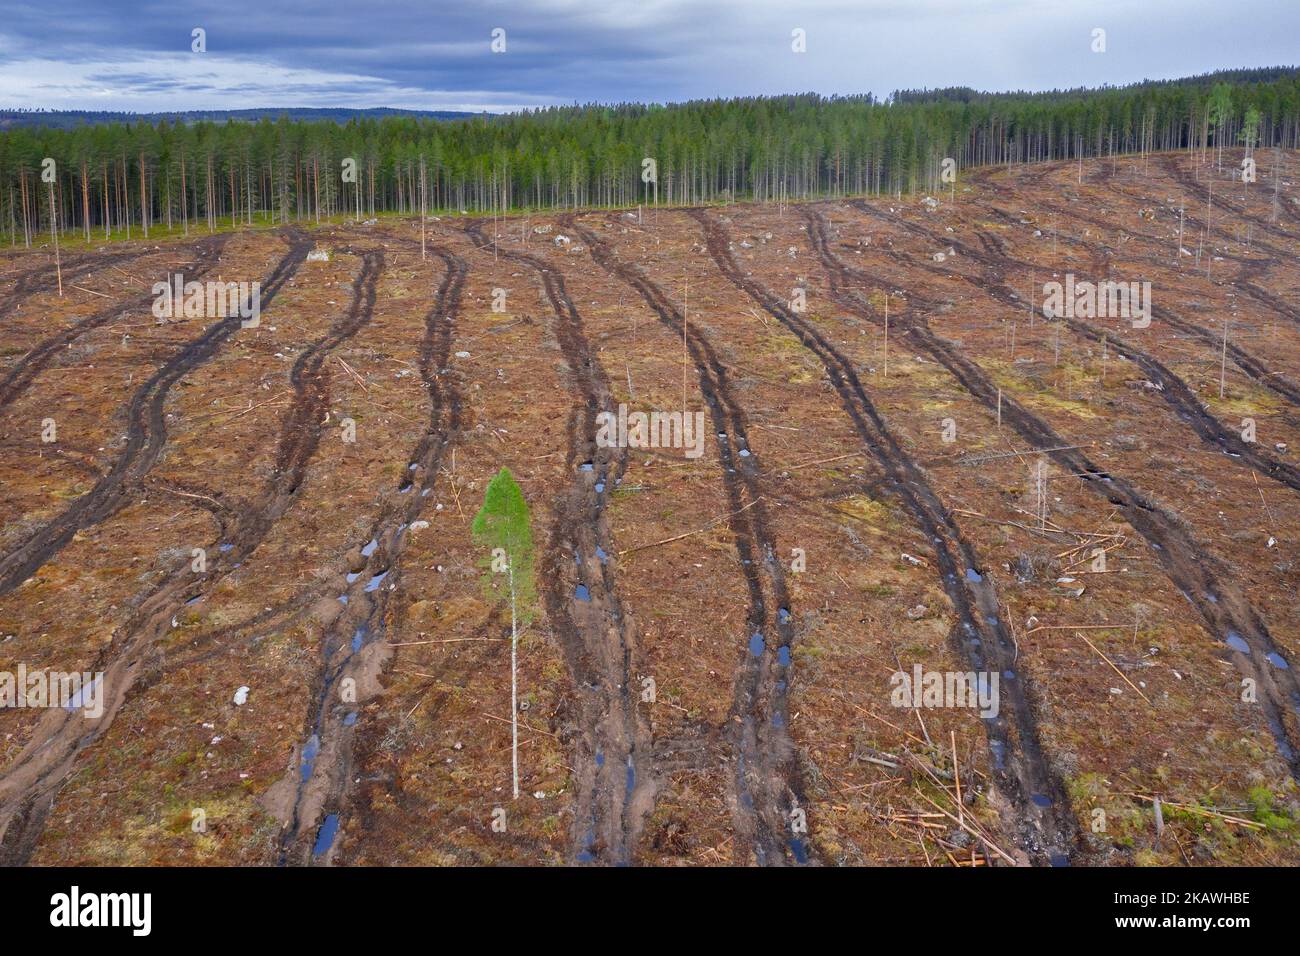 Aerial view over clearcut showing tracks of harvesters, clearcutting / clearfelling is a forestry / logging practice in which all trees are cut down Stock Photo